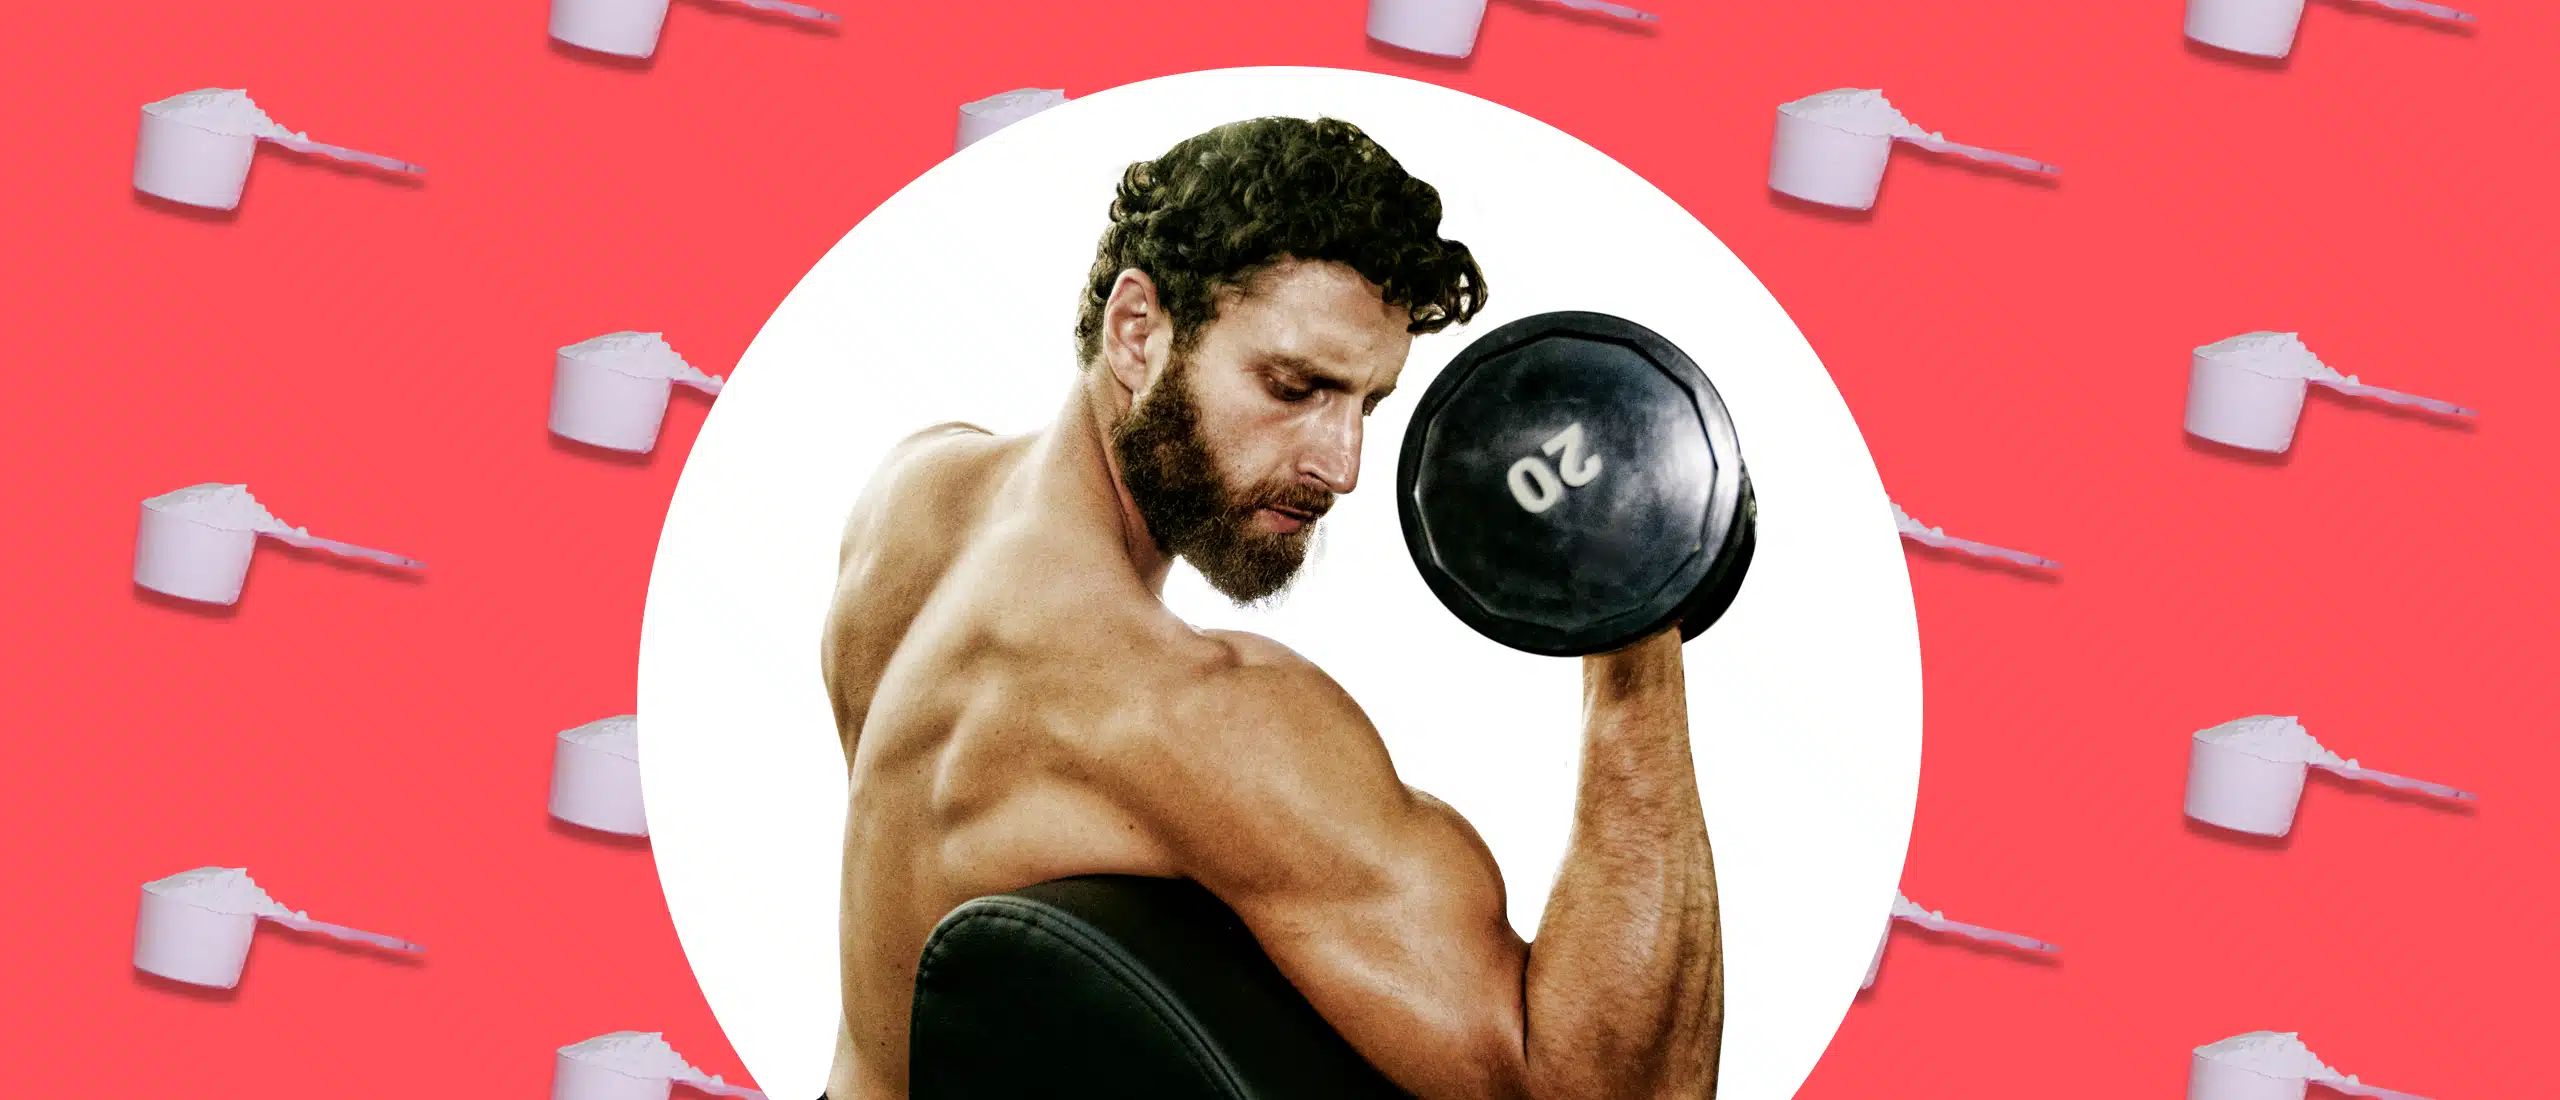 Man doing bicep curl on red background with protein scoops